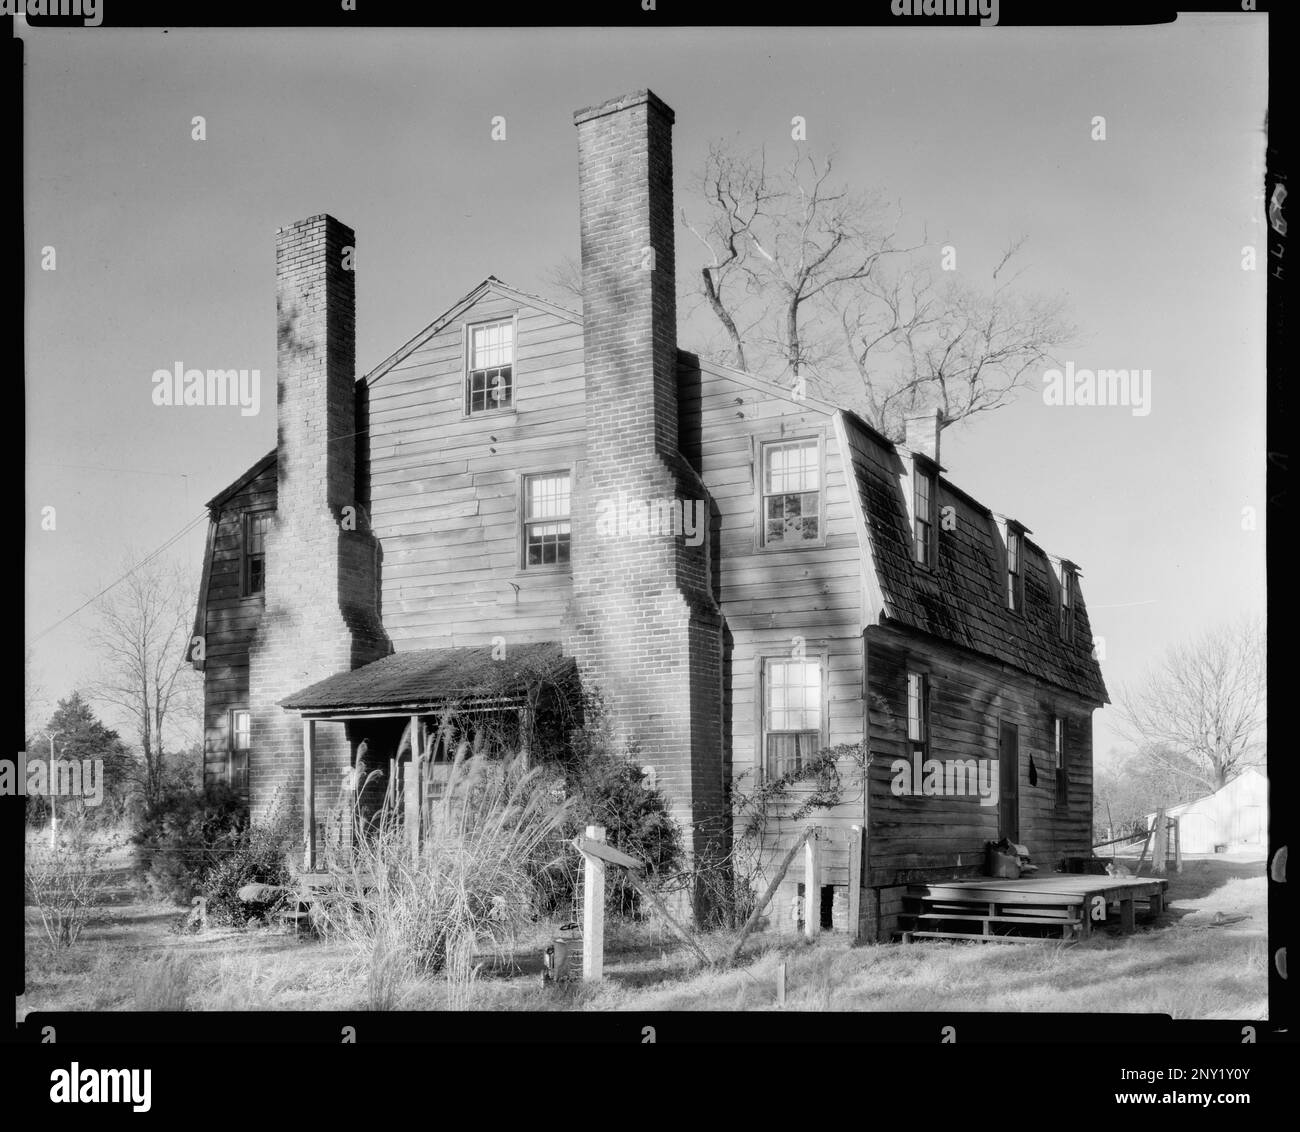 Reuben Lovett, Princess Anne County, Virginia. Carnegie Survey of the Architecture of the South. United States  Virginia  Princess Anne County, Chimneys, Gambrel roofs, Wooden buildings. Stock Photo